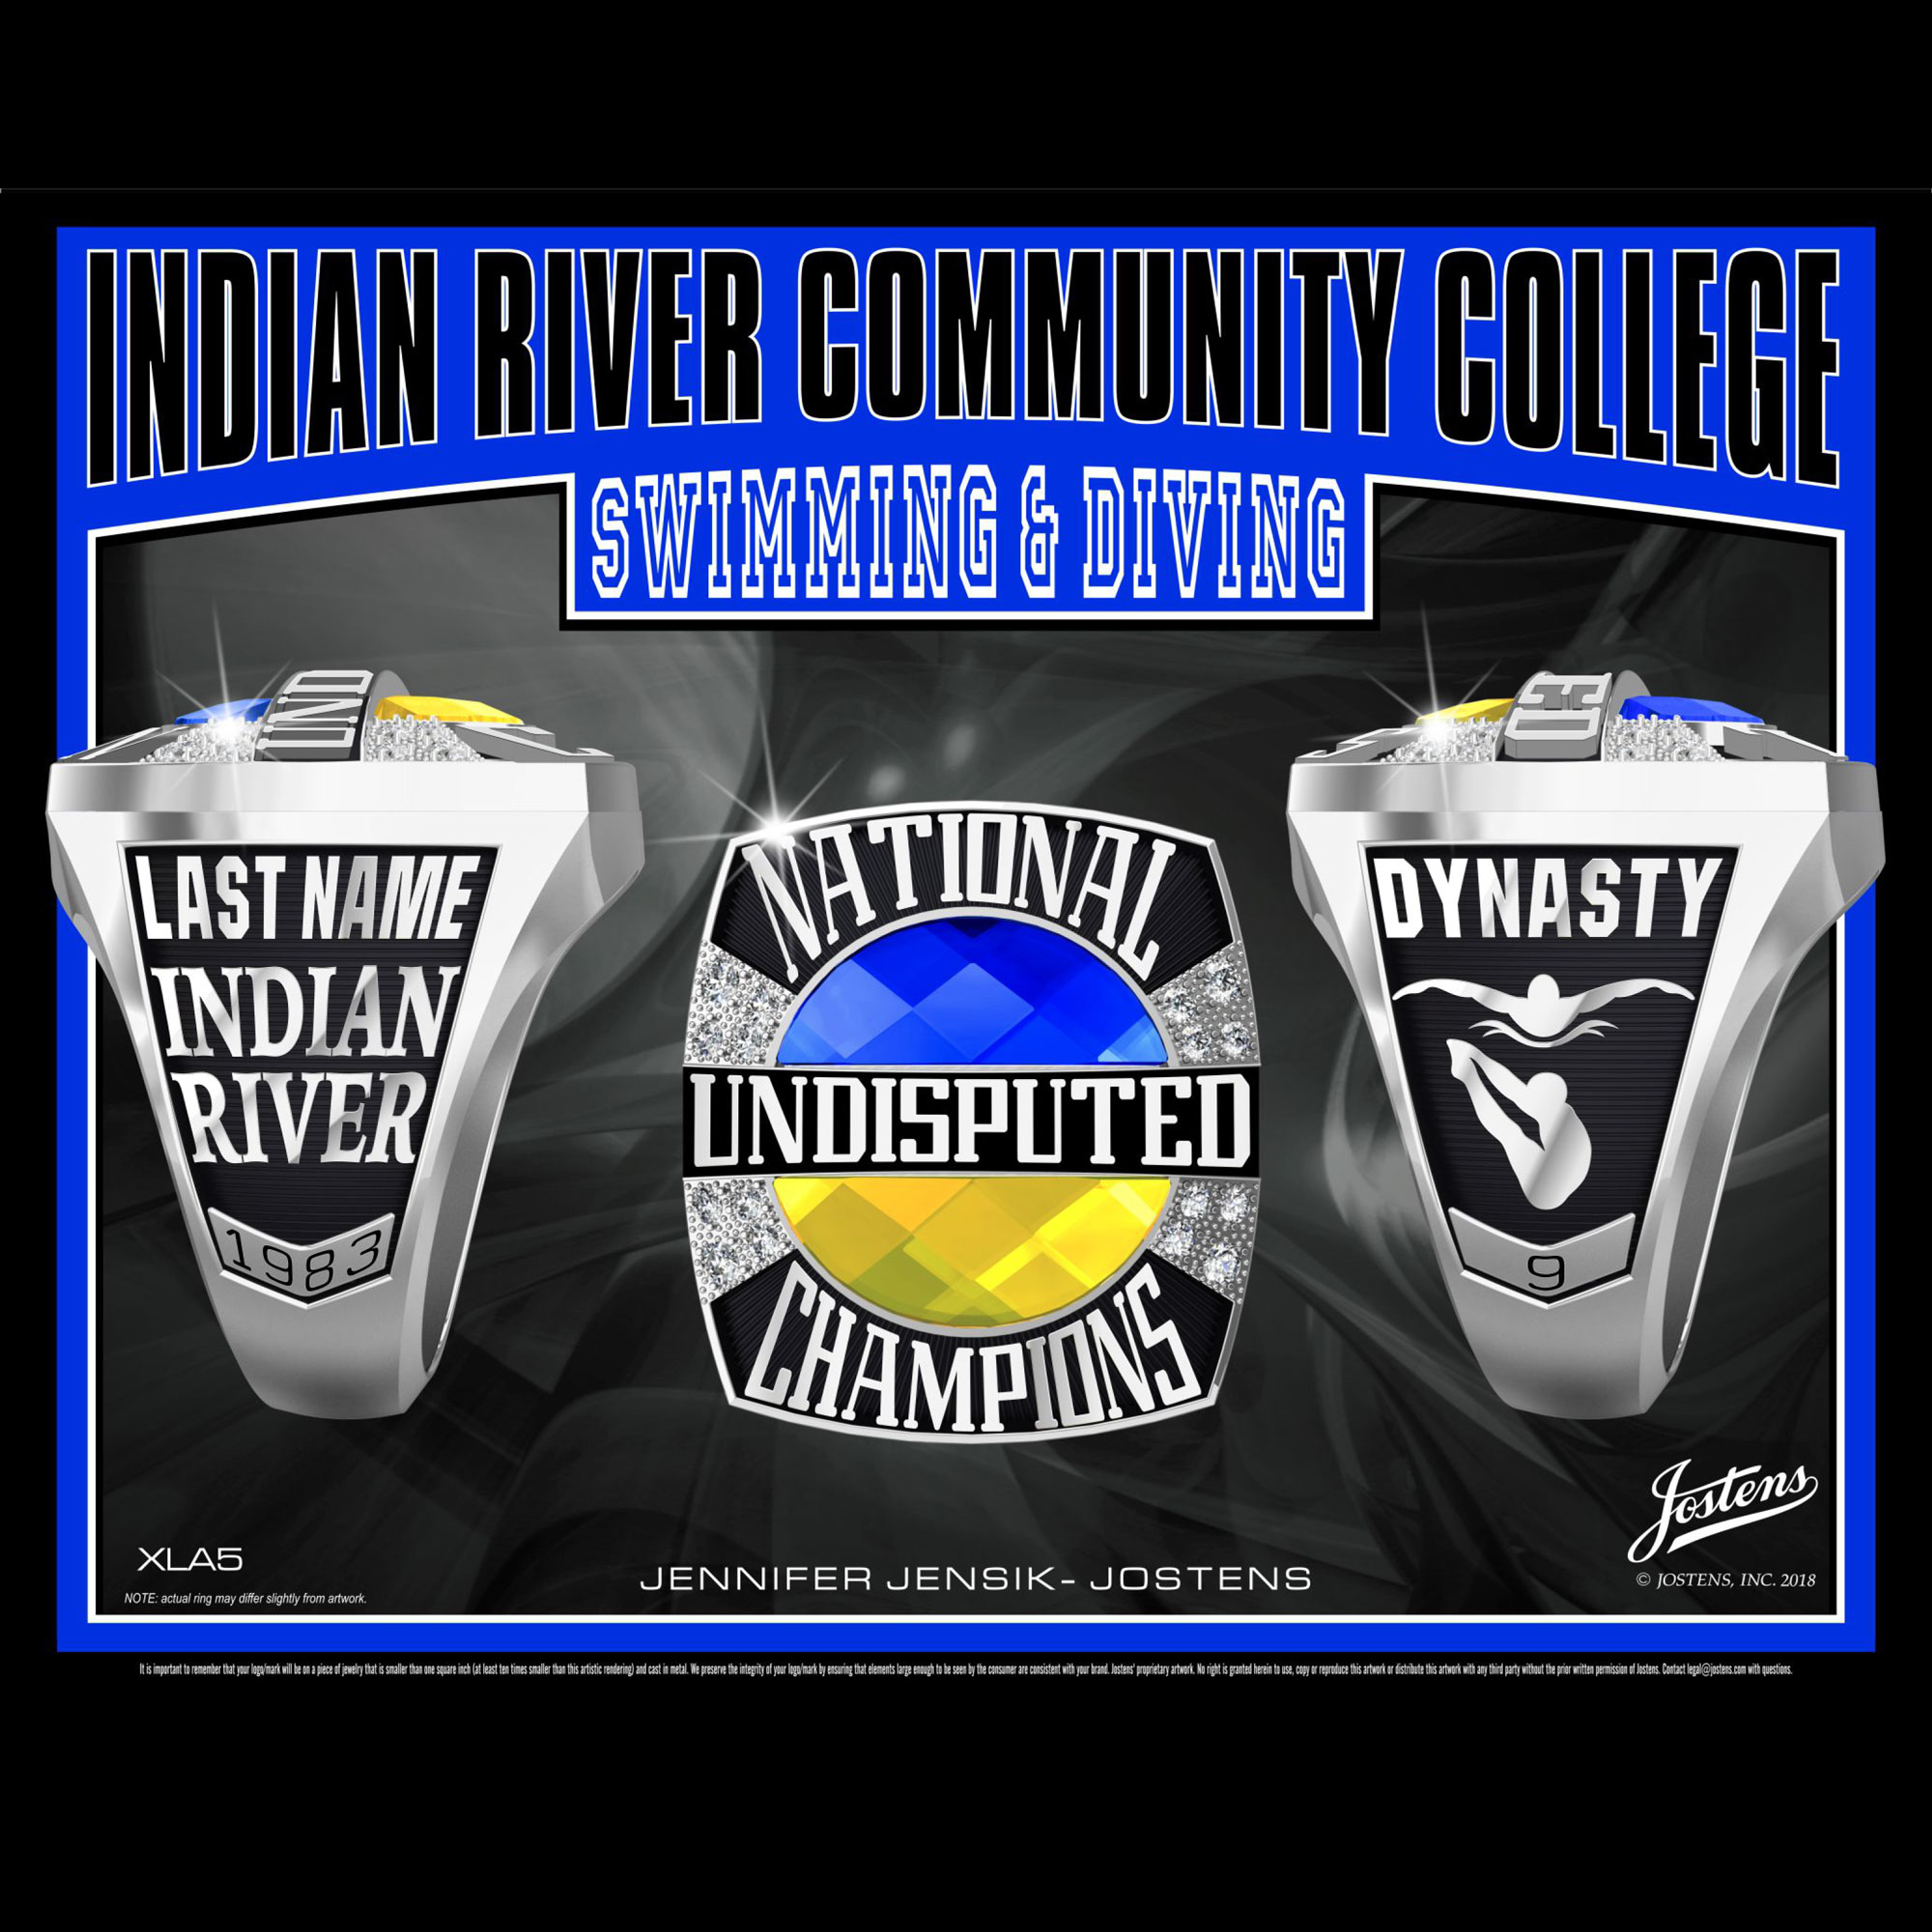 Indian River Community College Men's Swimming & Diving National Championship Ring